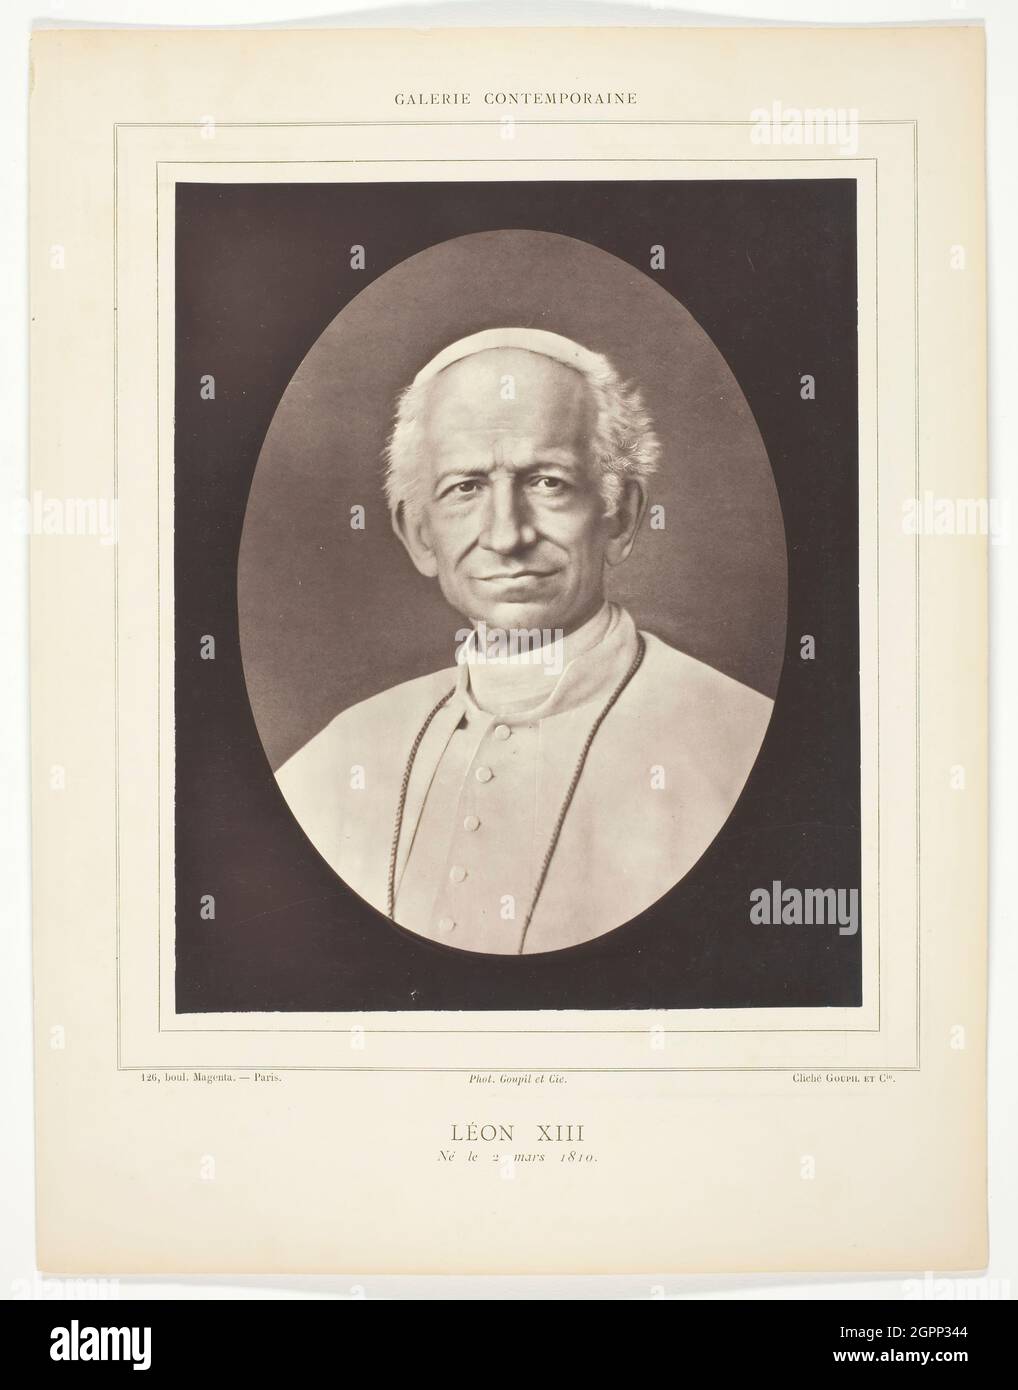 L&#xe9;on XIII, 1875/79. [Portrait of Pope Leo XIII]. Woodburytype, from the periodical &quot;Galerie Contemporaine Litt&#xe9;raire, Artistique&quot; (1879), volume 7. Stock Photo